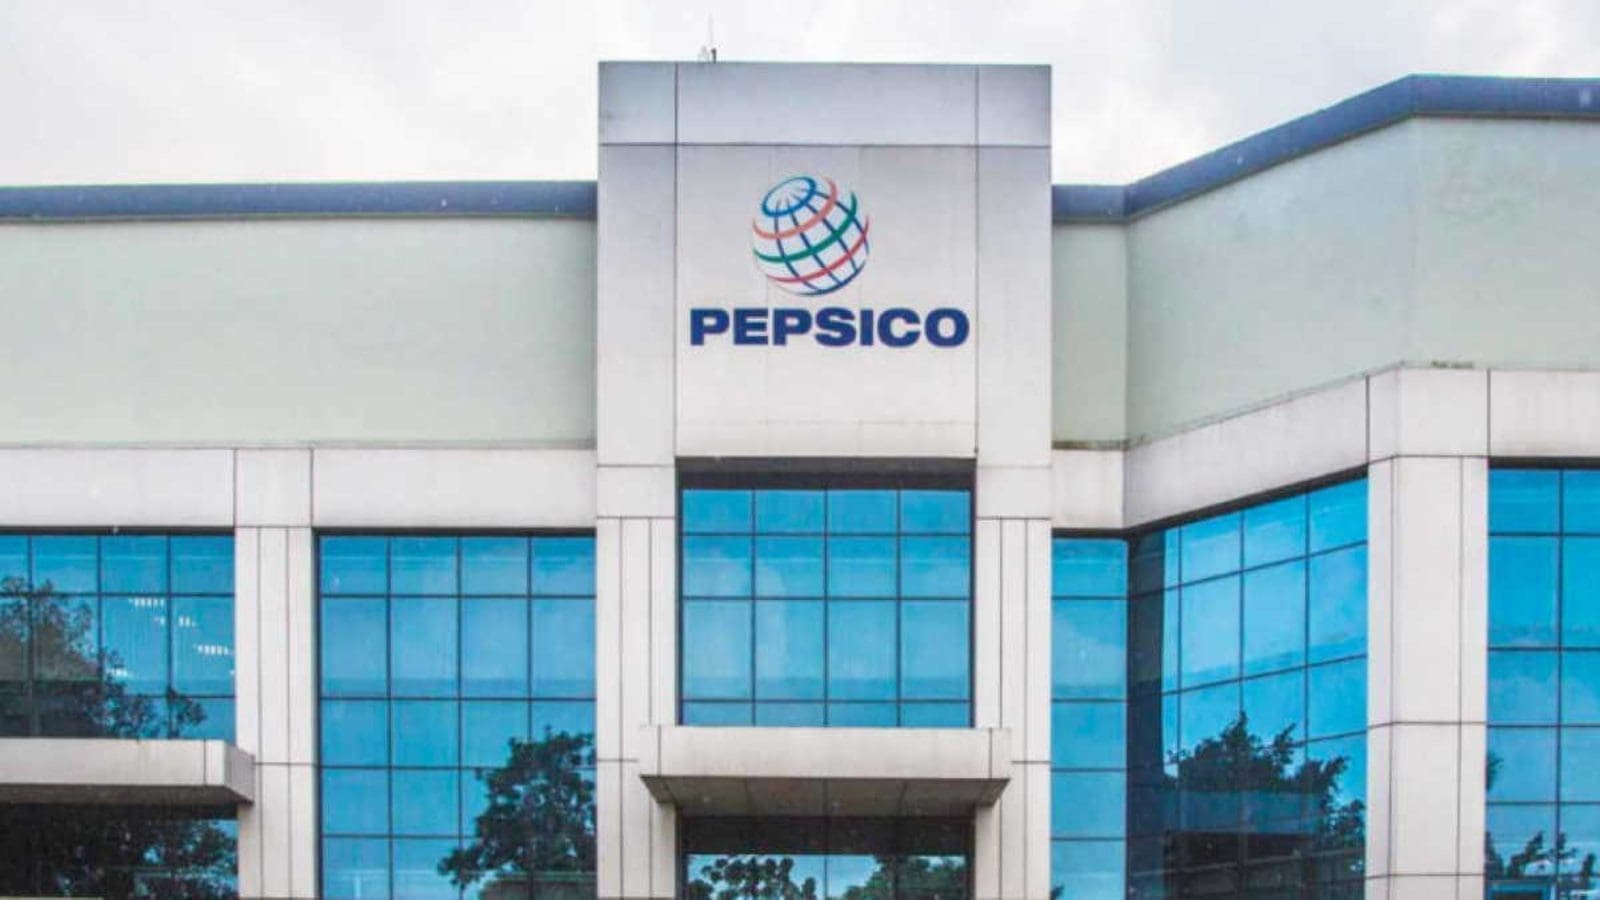 PepsiCo makes progress in regenerative agriculture and nutrition